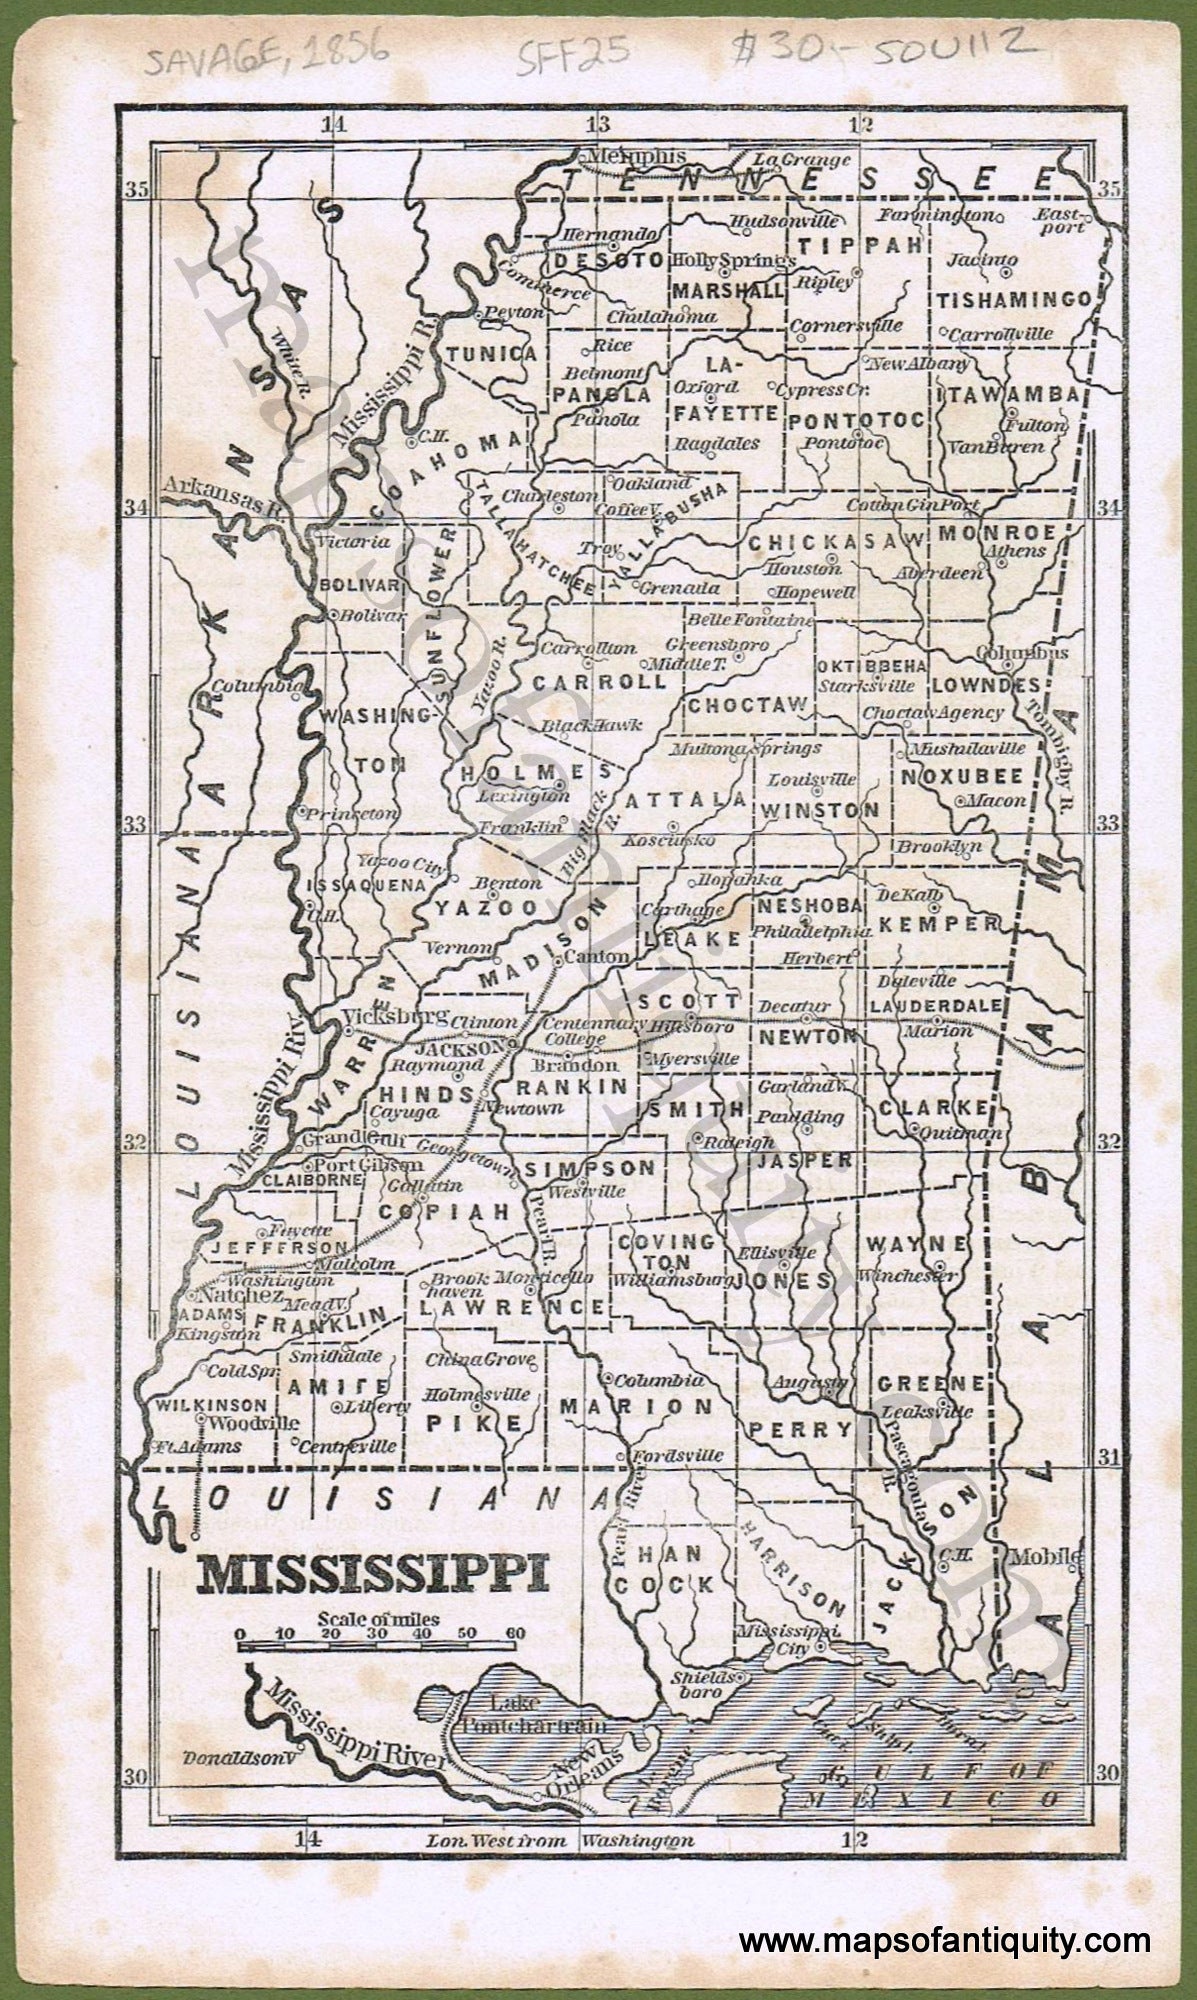 Black-and-White-Antique-Map-Mississippi-**********-Mississippi--1856-Savage-Maps-Of-Antiquity